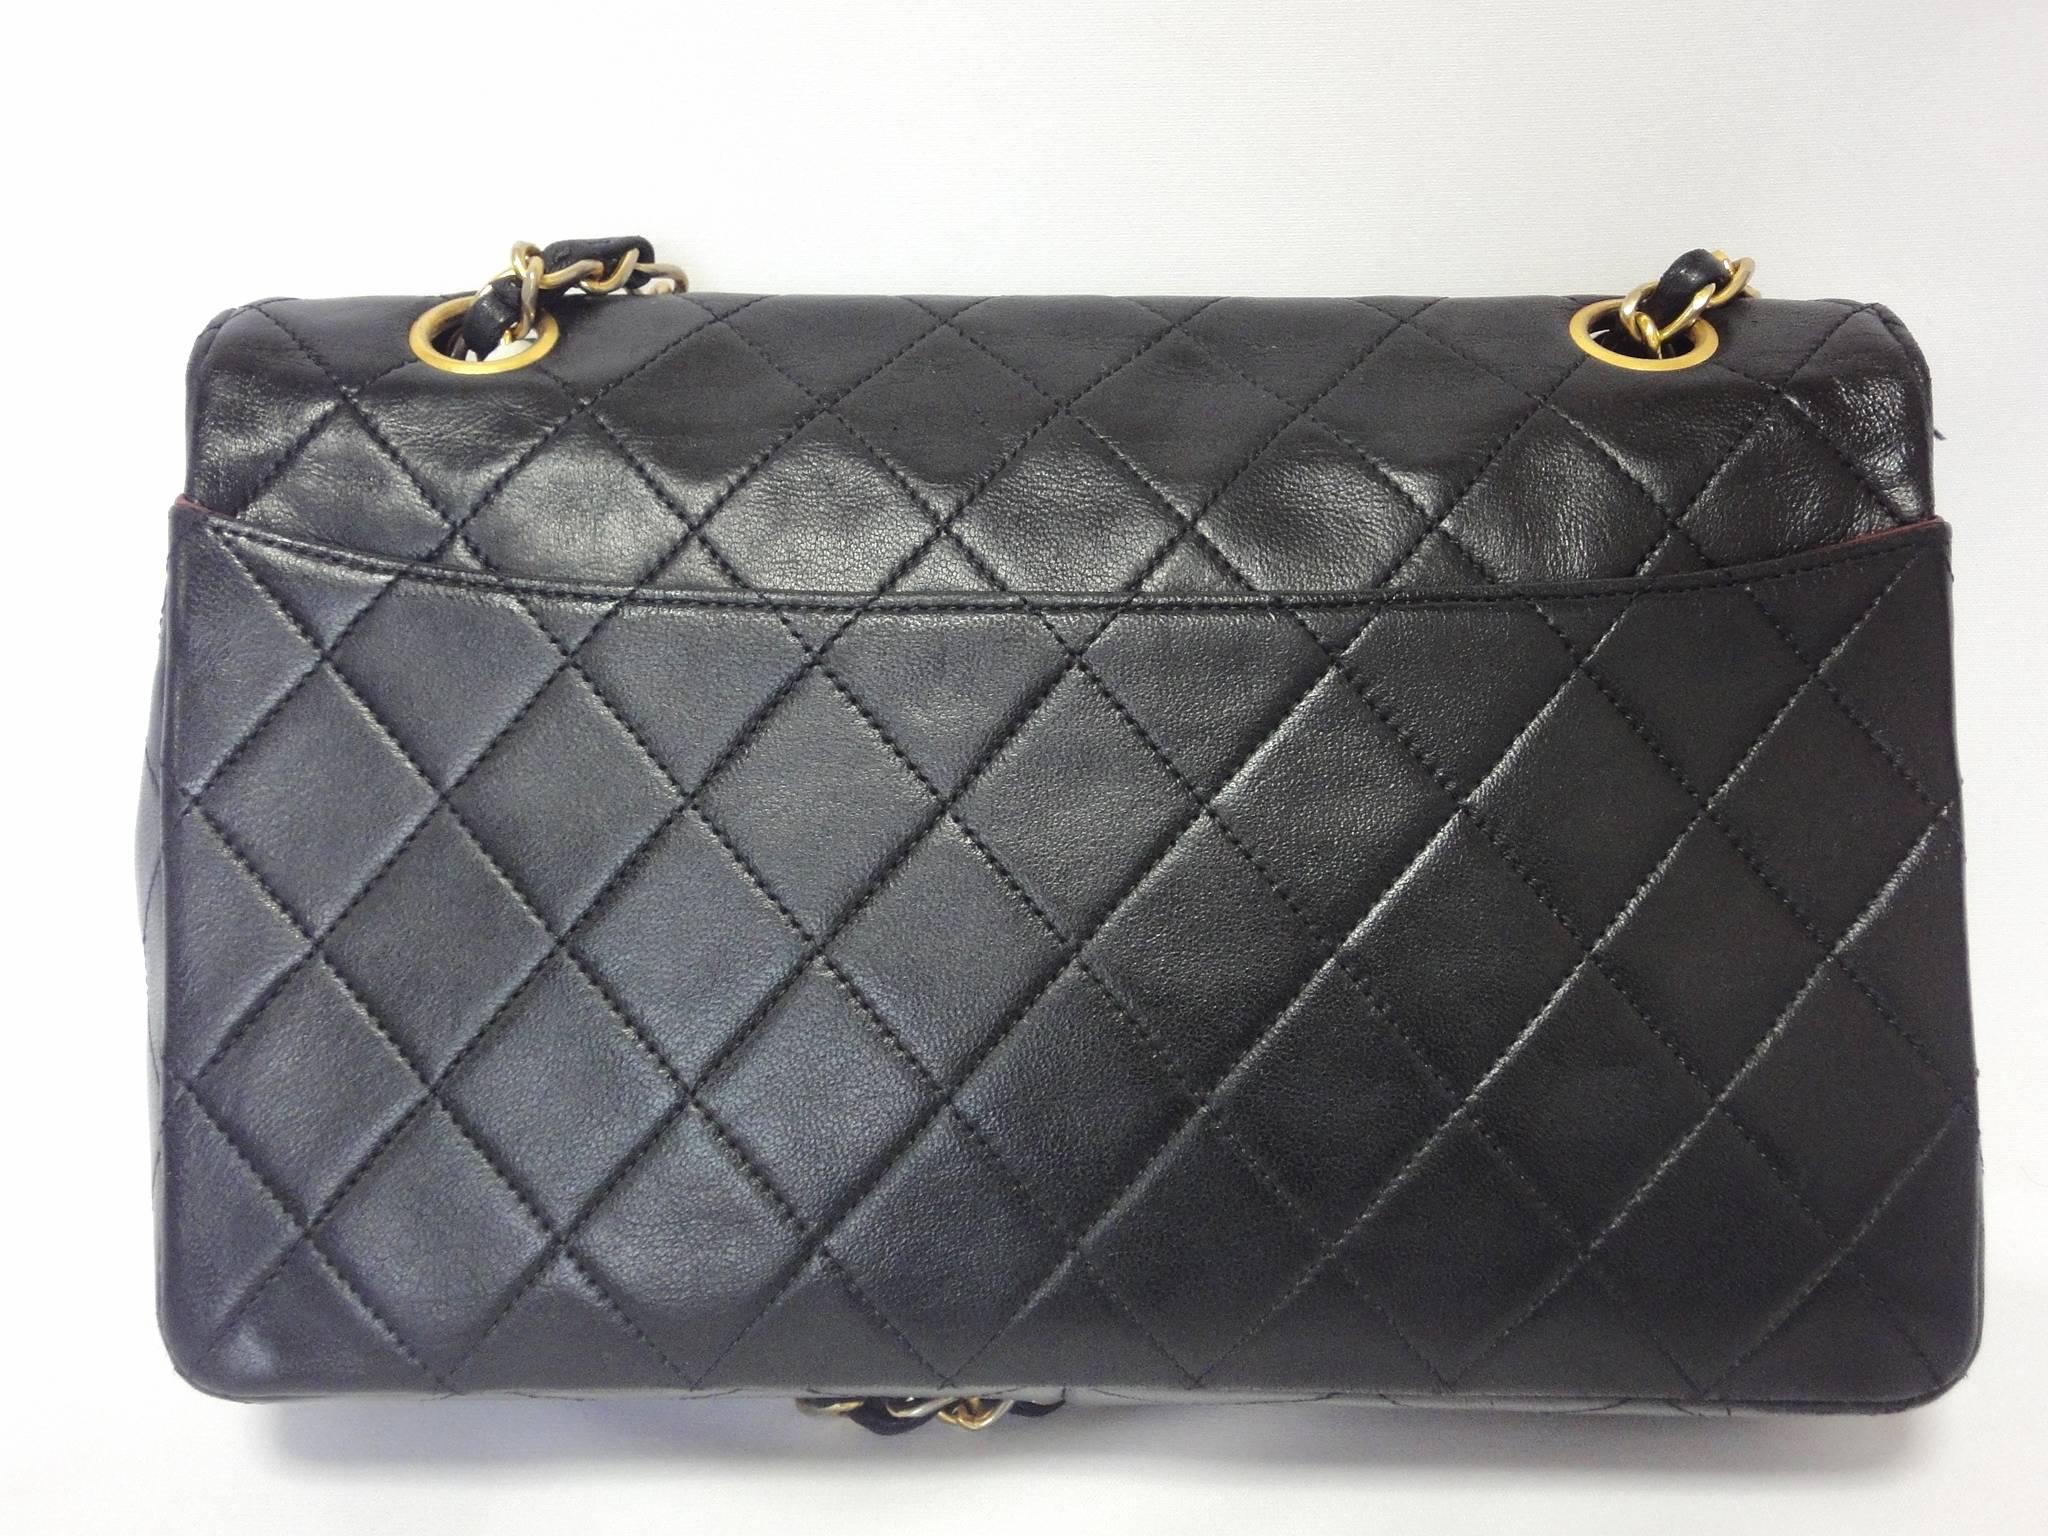 Gray Vintage Chanel classic 2.55 black lambskin shoulder bag with golden chain straps